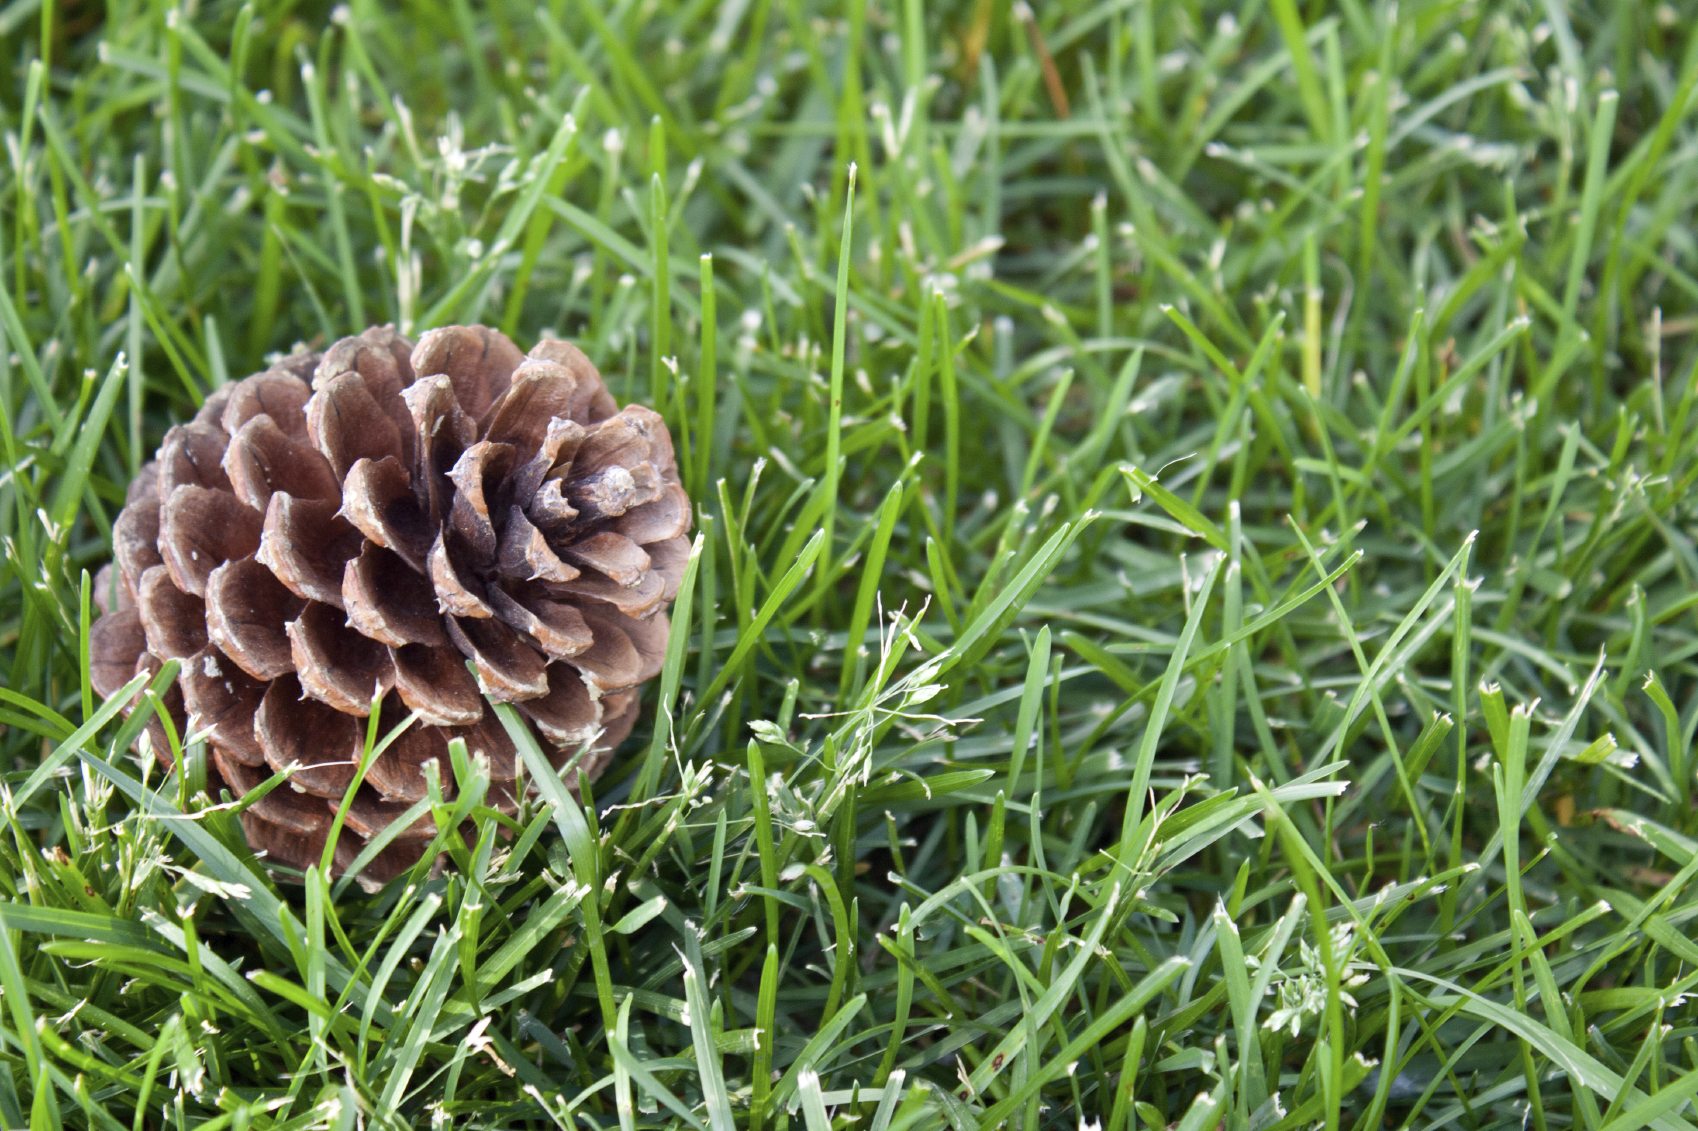 Planting Entire Pine Cones - Information On Sprouting A Whole Pine Cone